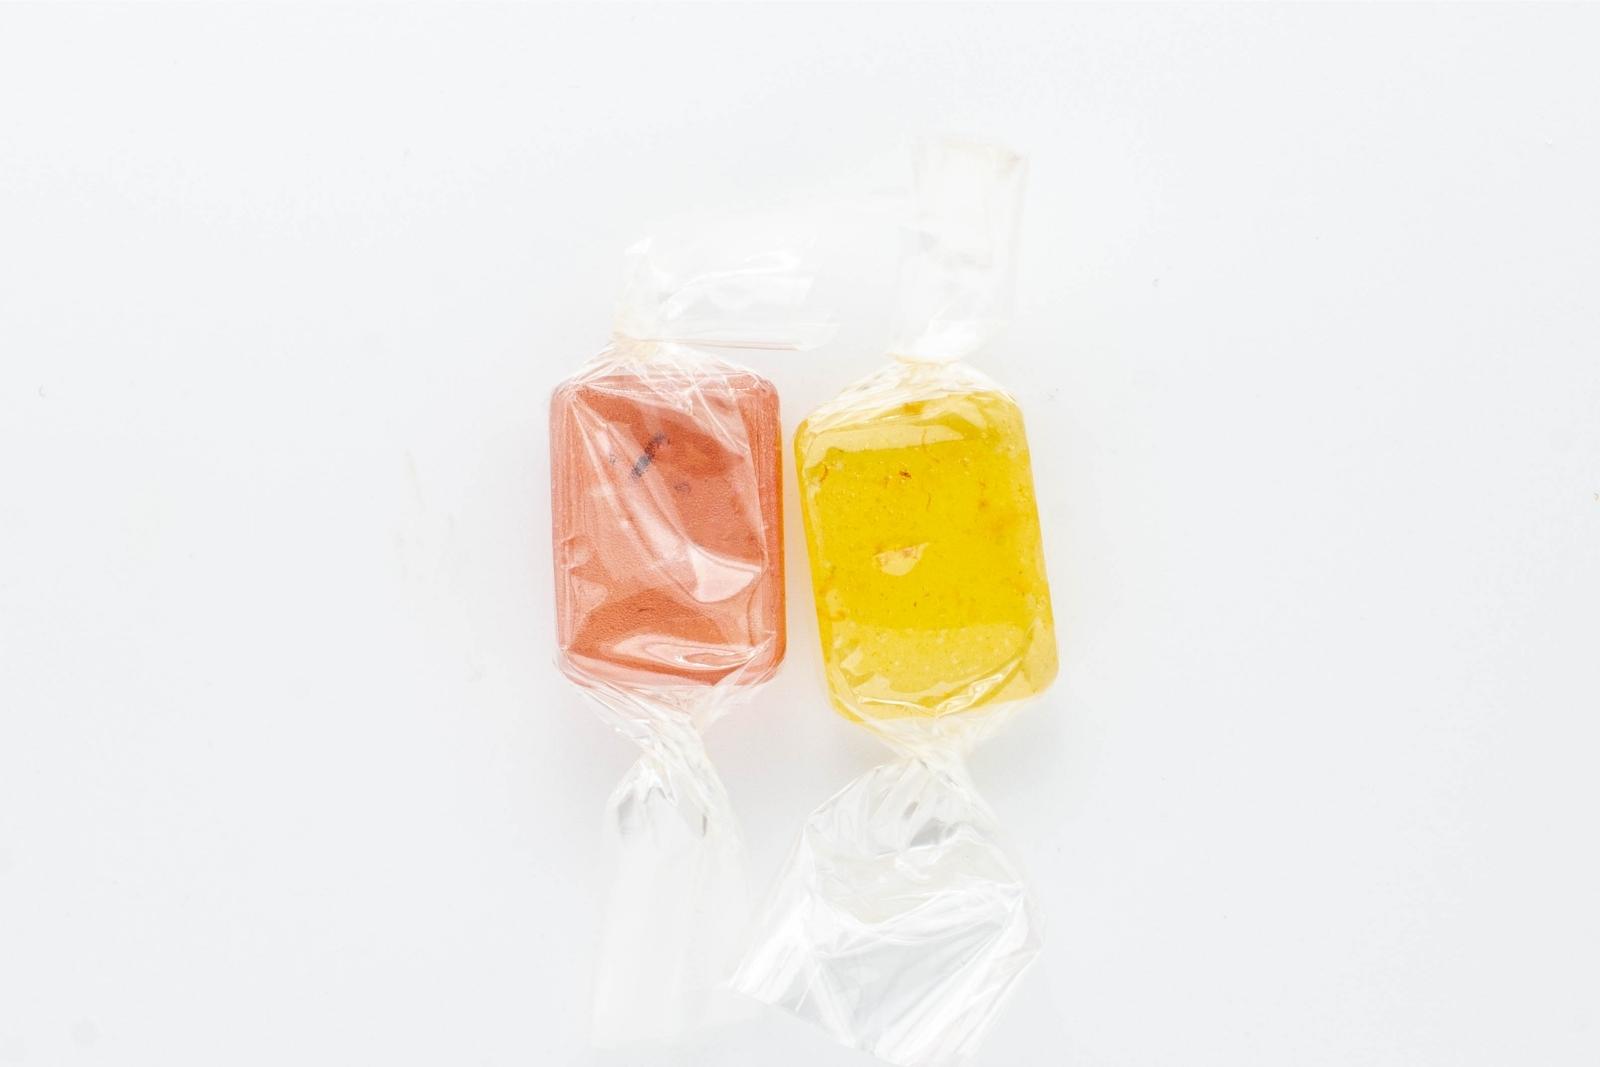 Two varieties of Nice CBD hard candies, raspberry and lemon, on a white background